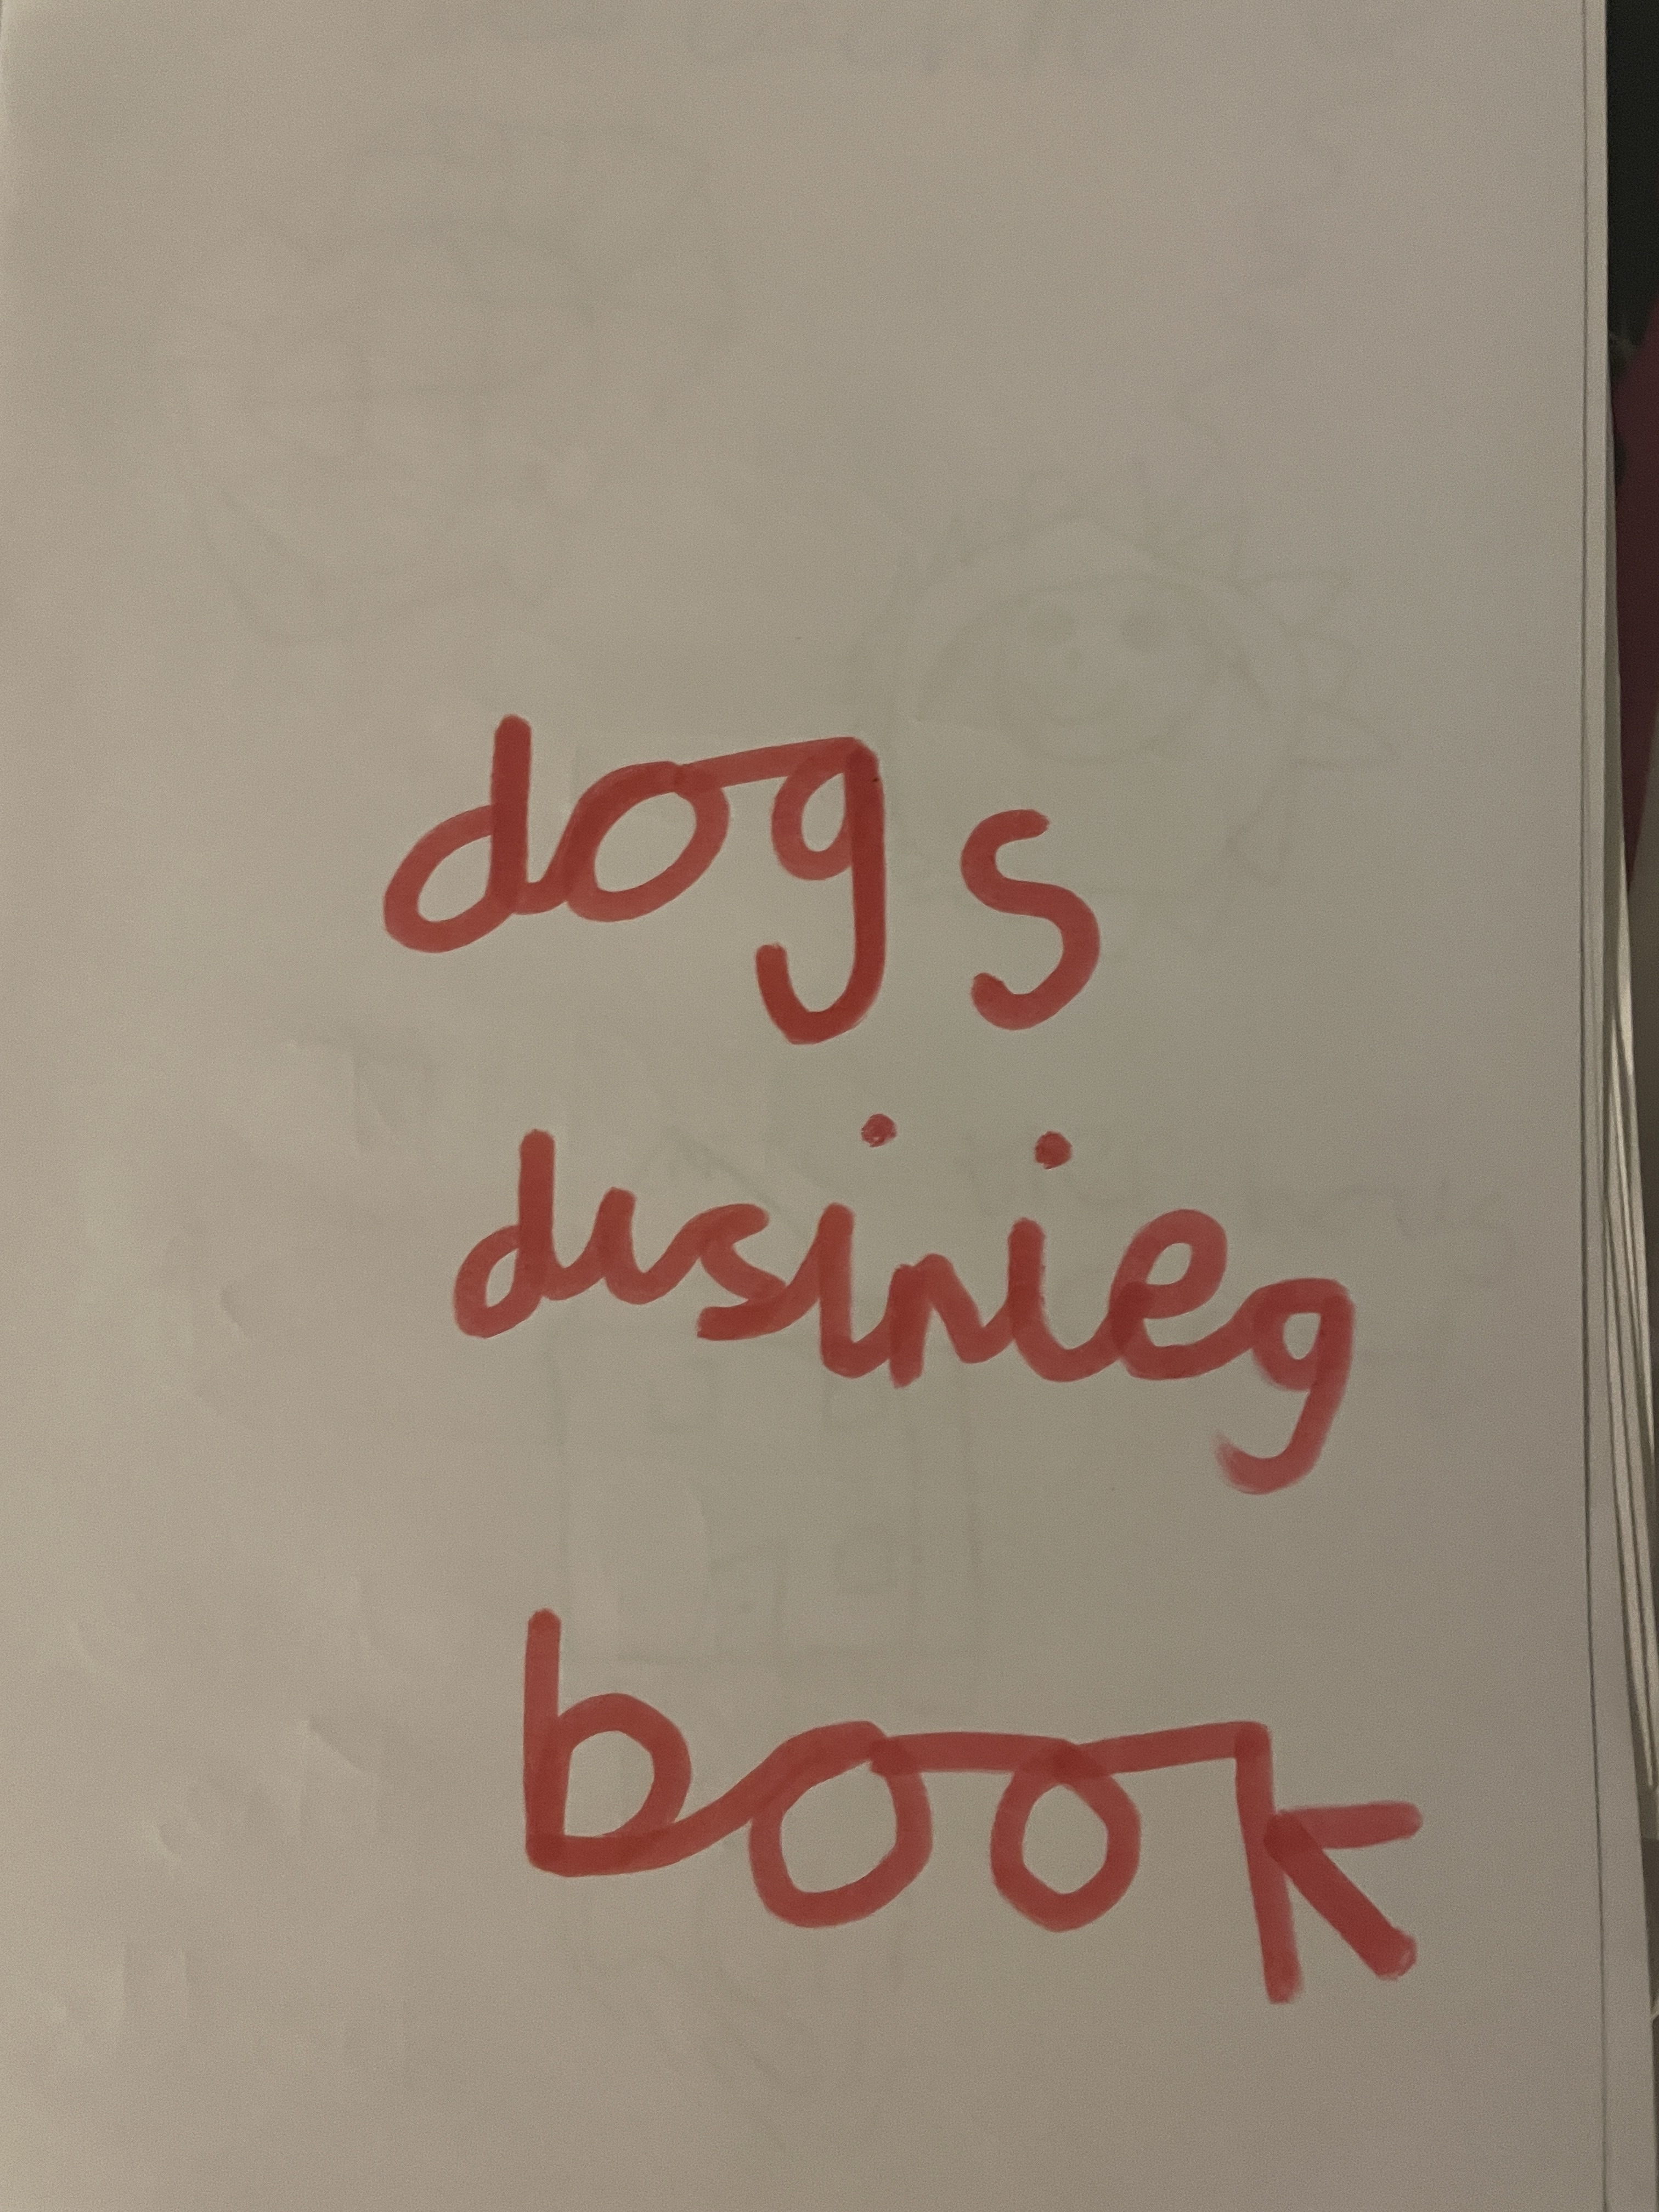 A picture of Iya Mistry's Dog Designing book